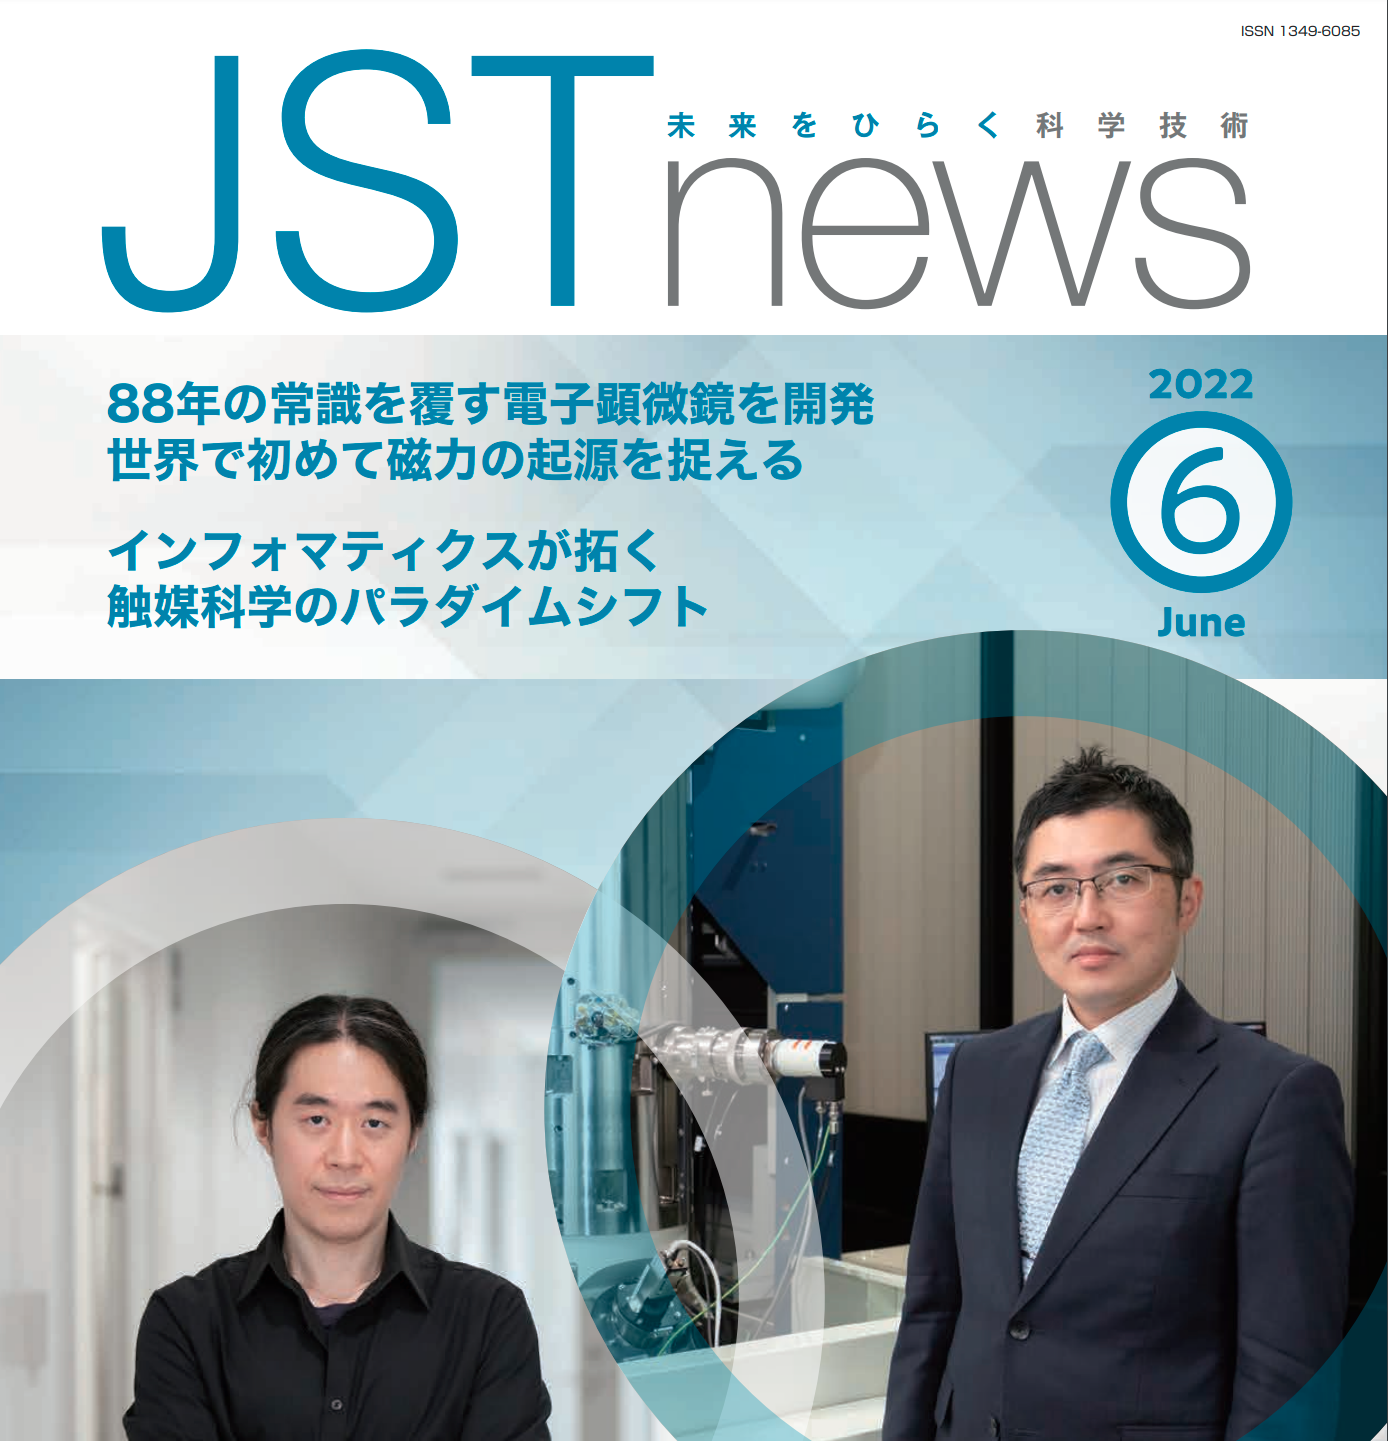 The research of Prof. Naoya Shibata is highlighted in JST NEWS